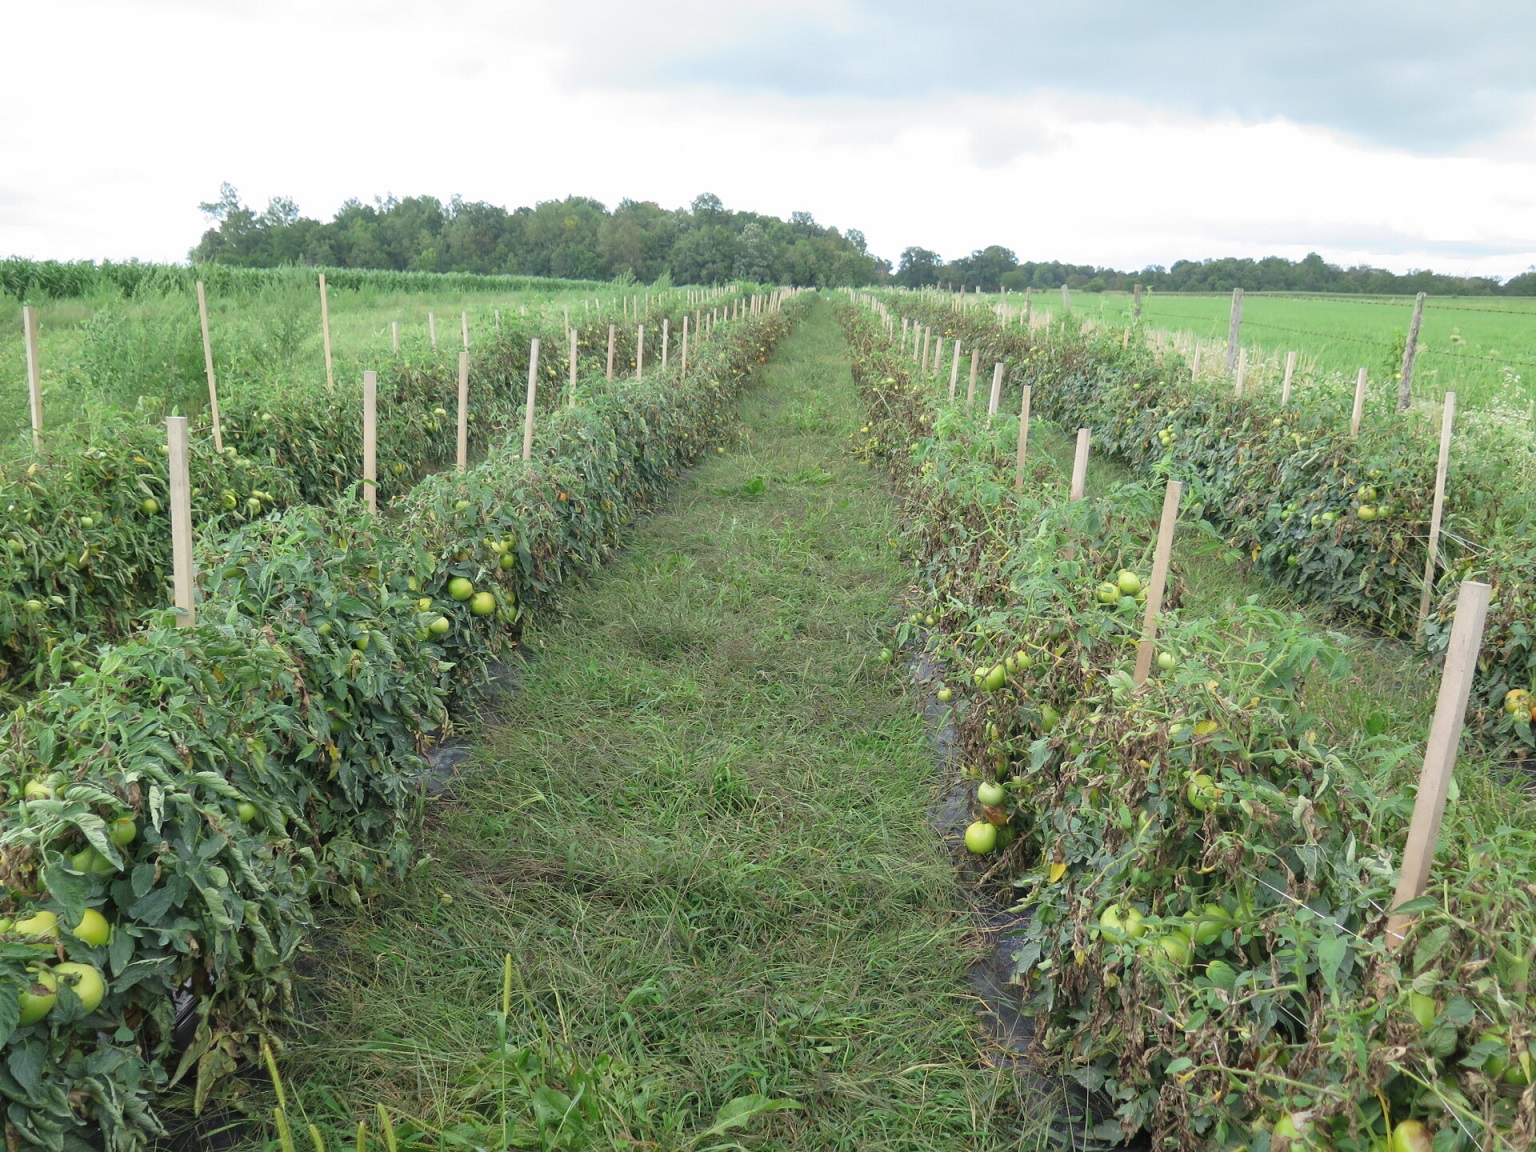 Figure 1. Although late blight is not common in Indiana, when it occurs, it can spread rapidly in a field such as this one.